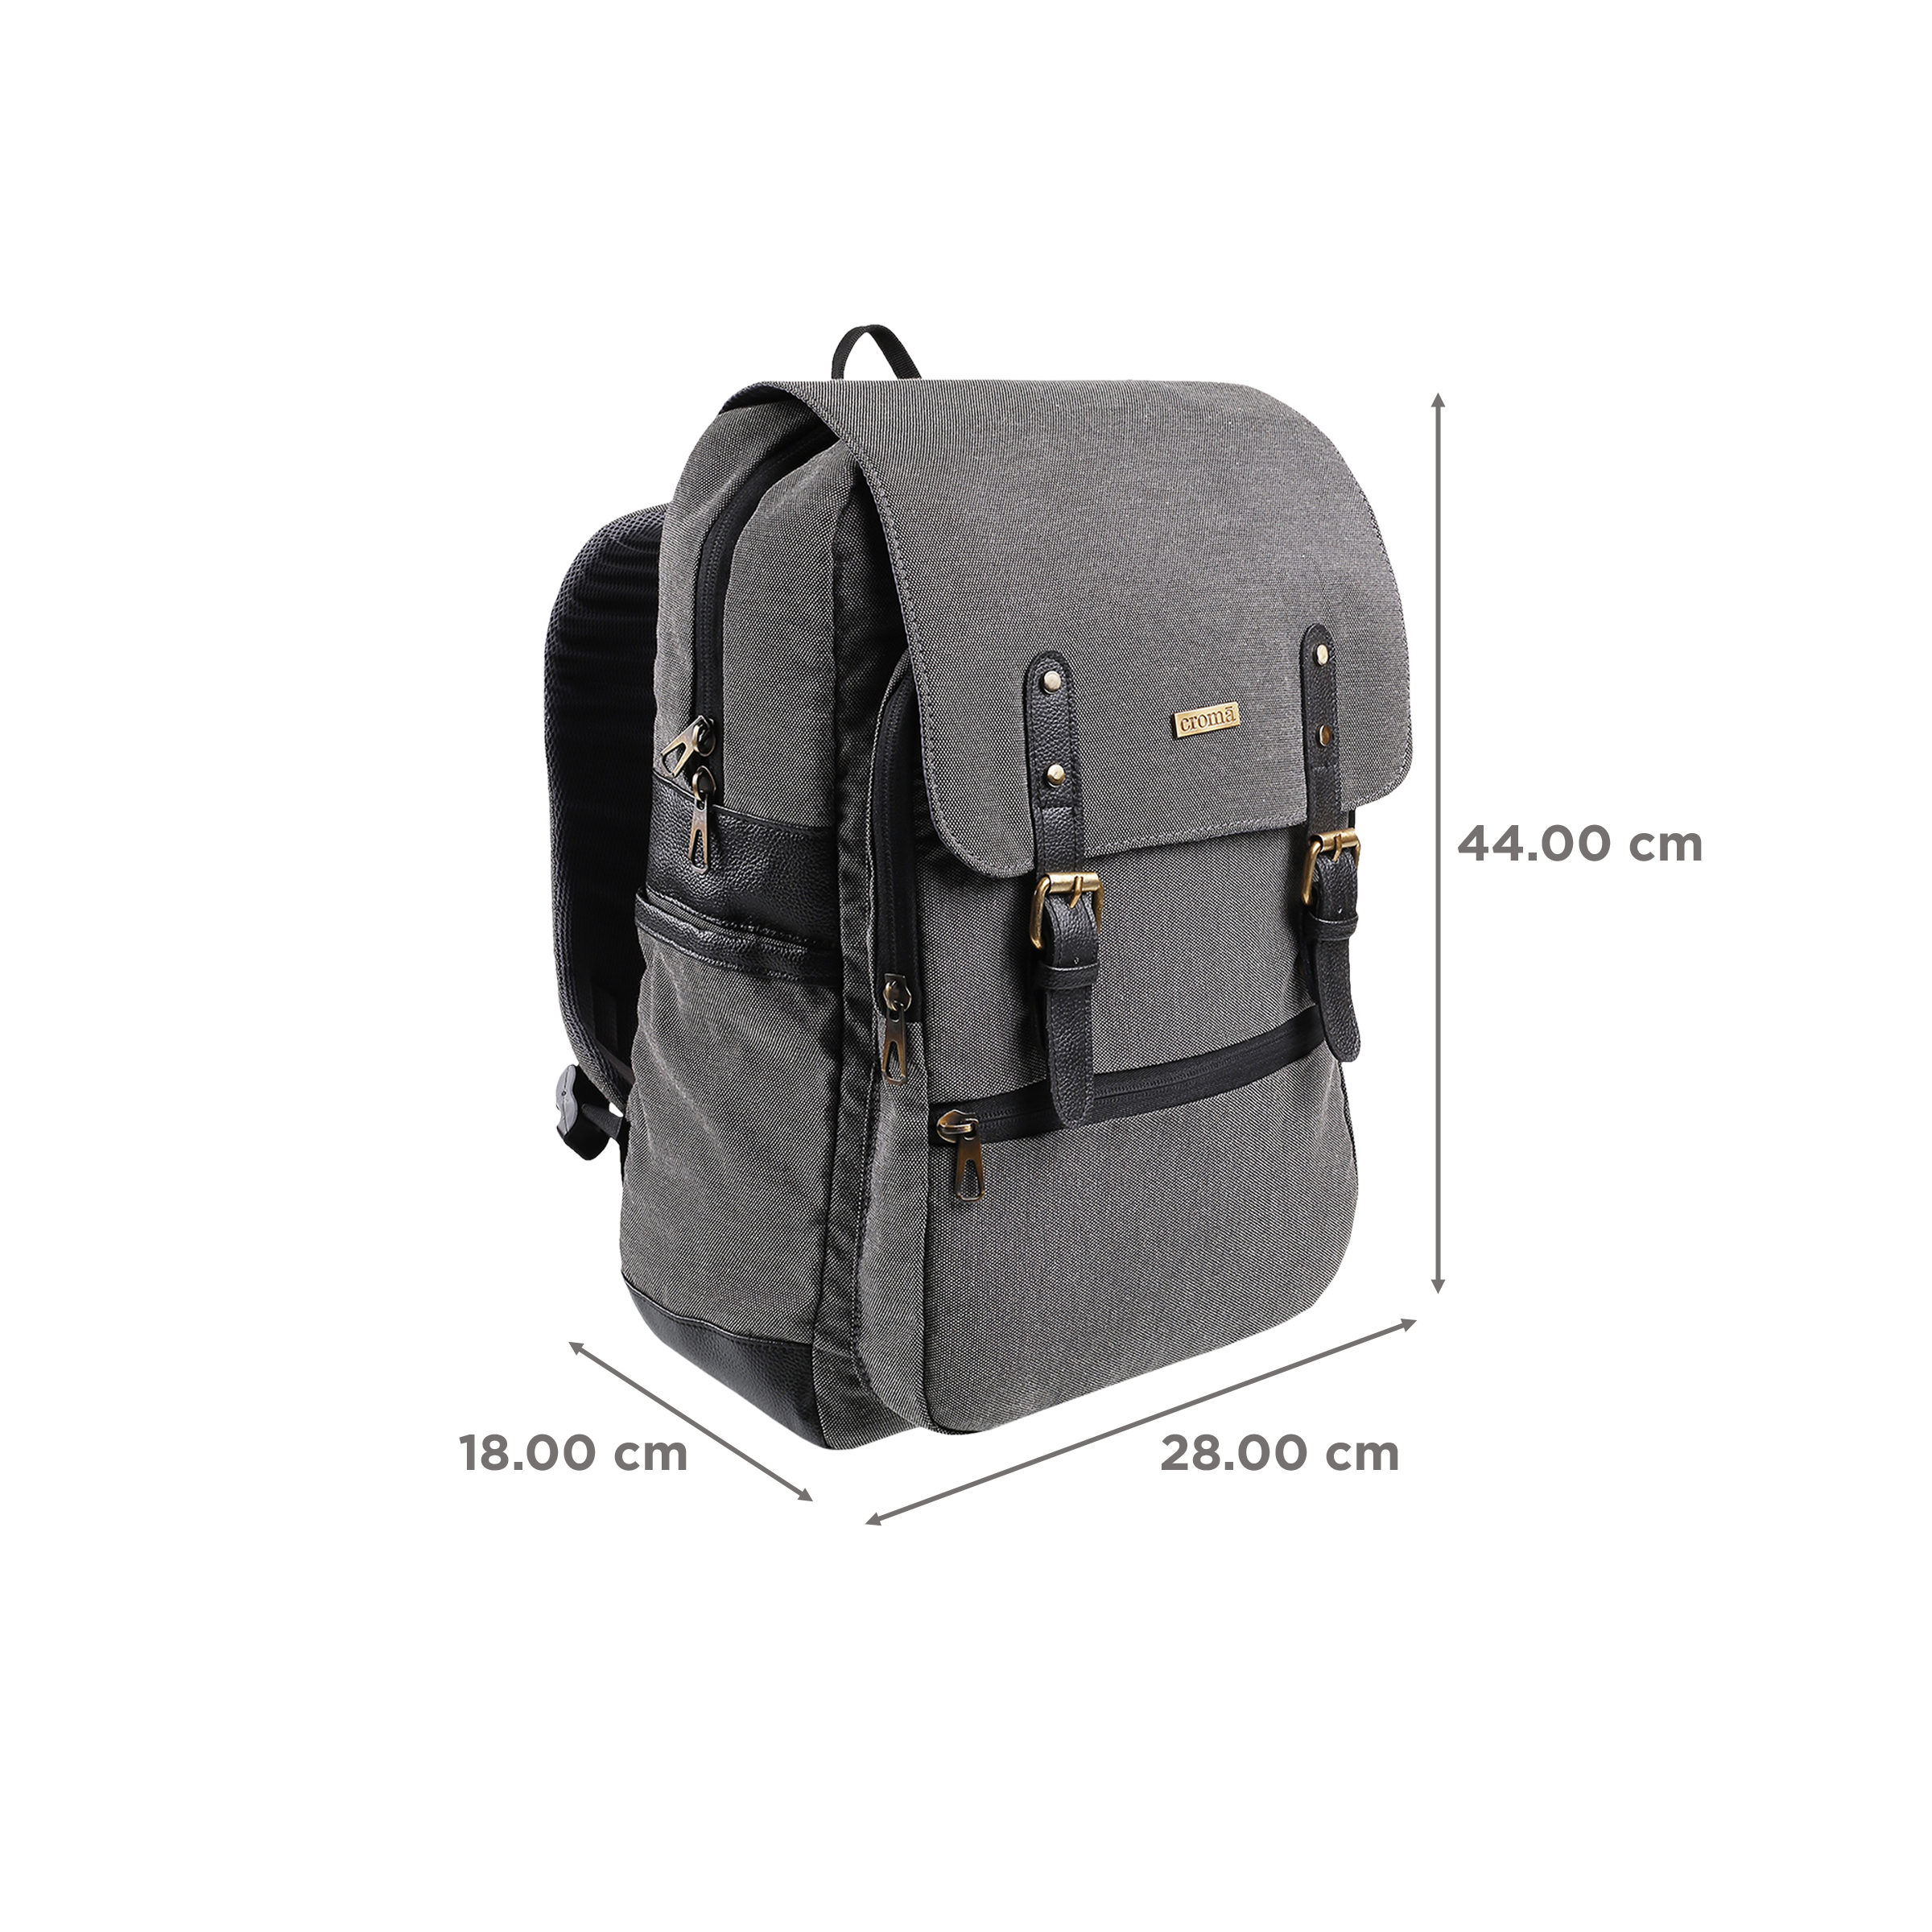 Buy Croma Crpcb6106ssd01 Mystic 35 Litres Polyester Backpack Online At Best  Price @ Tata CLiQ